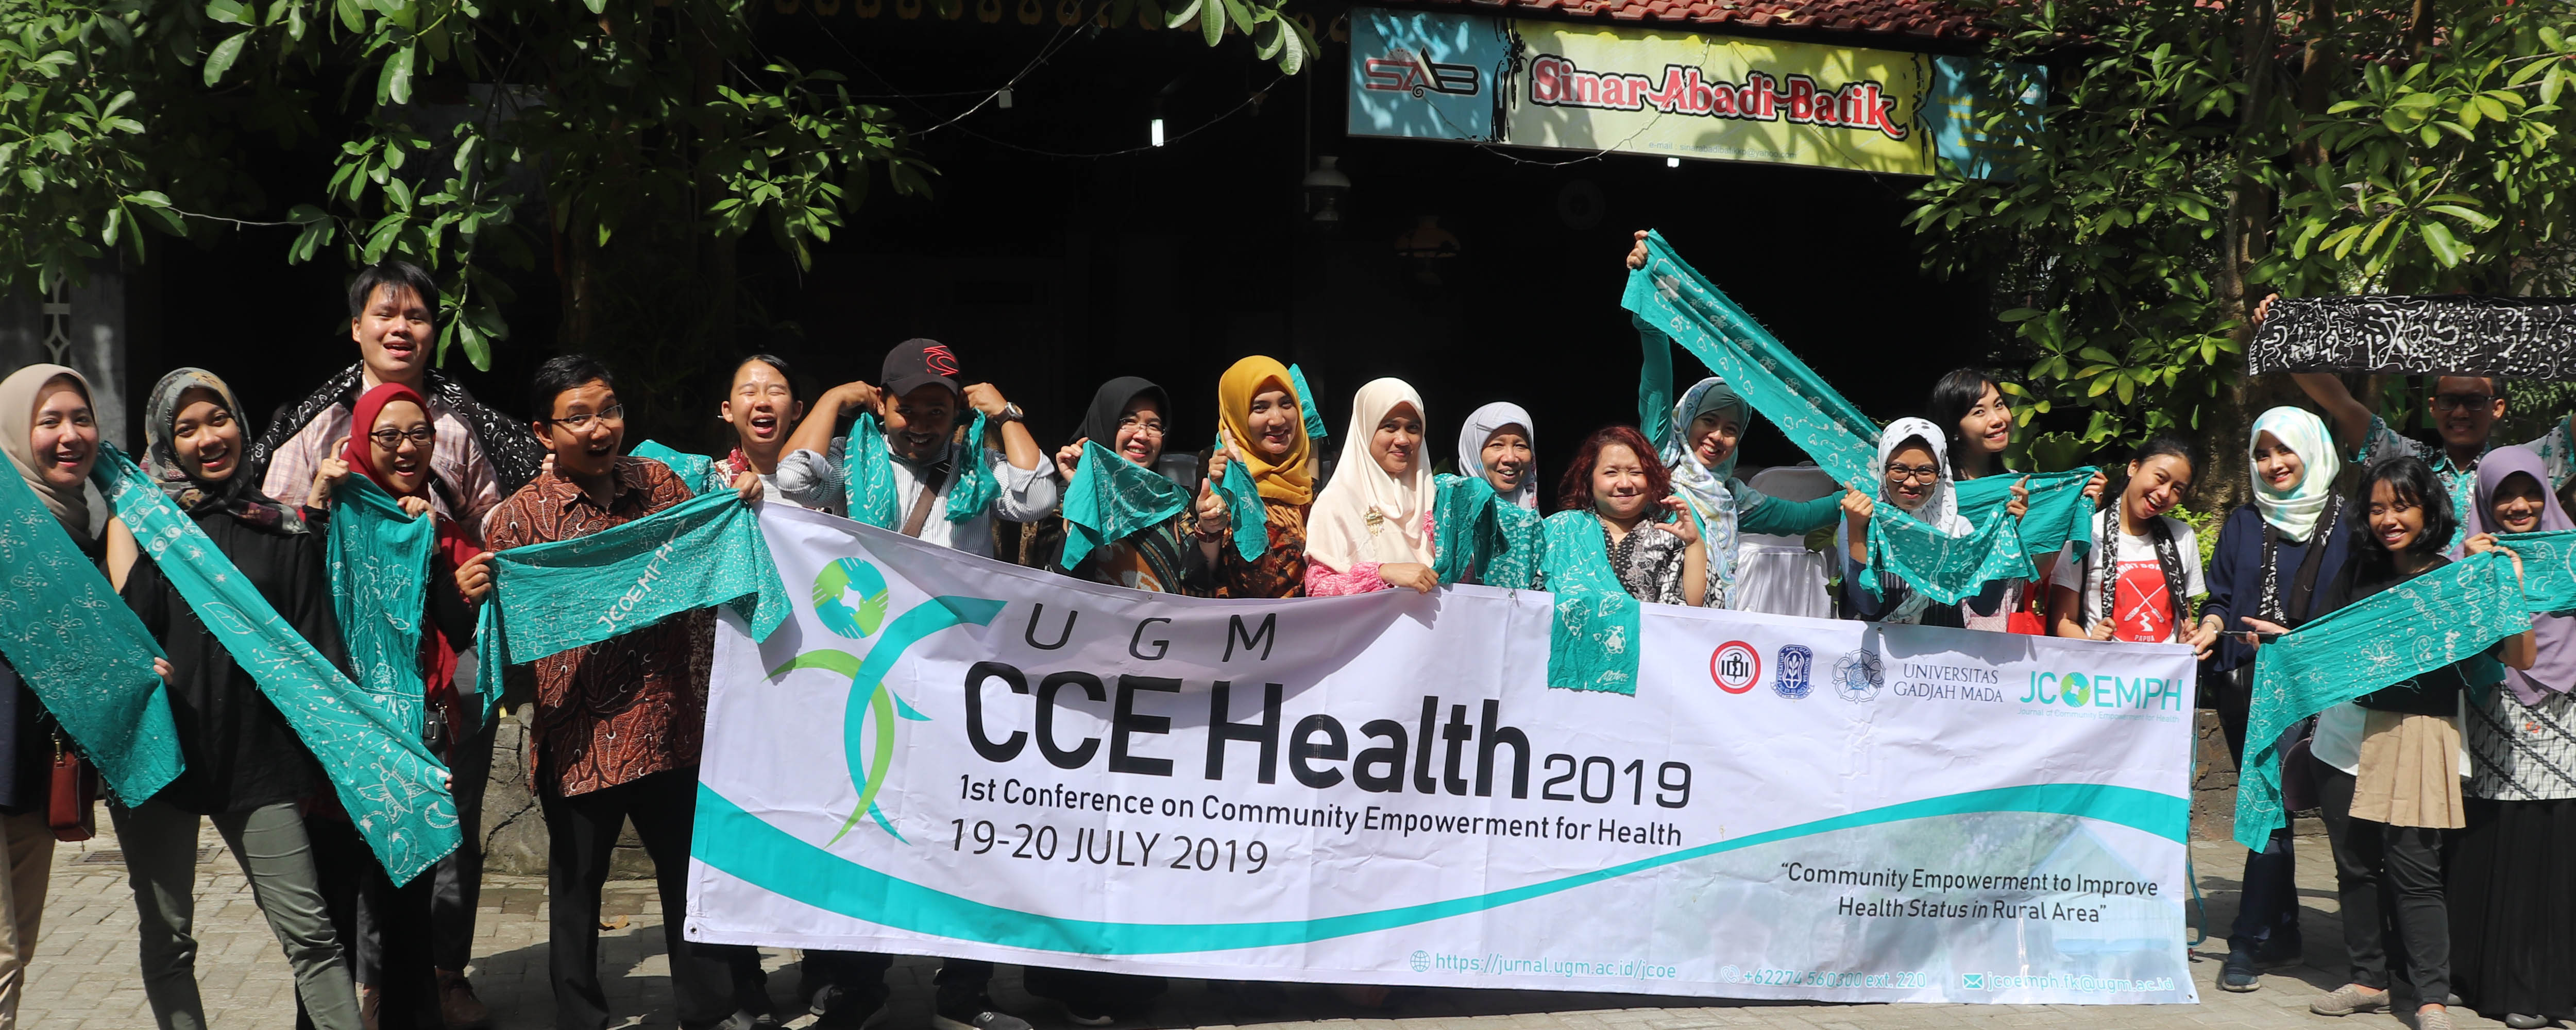 3rd CONFERENCE ON COMMUNITY EMPOWERMENT FOR HEALTH